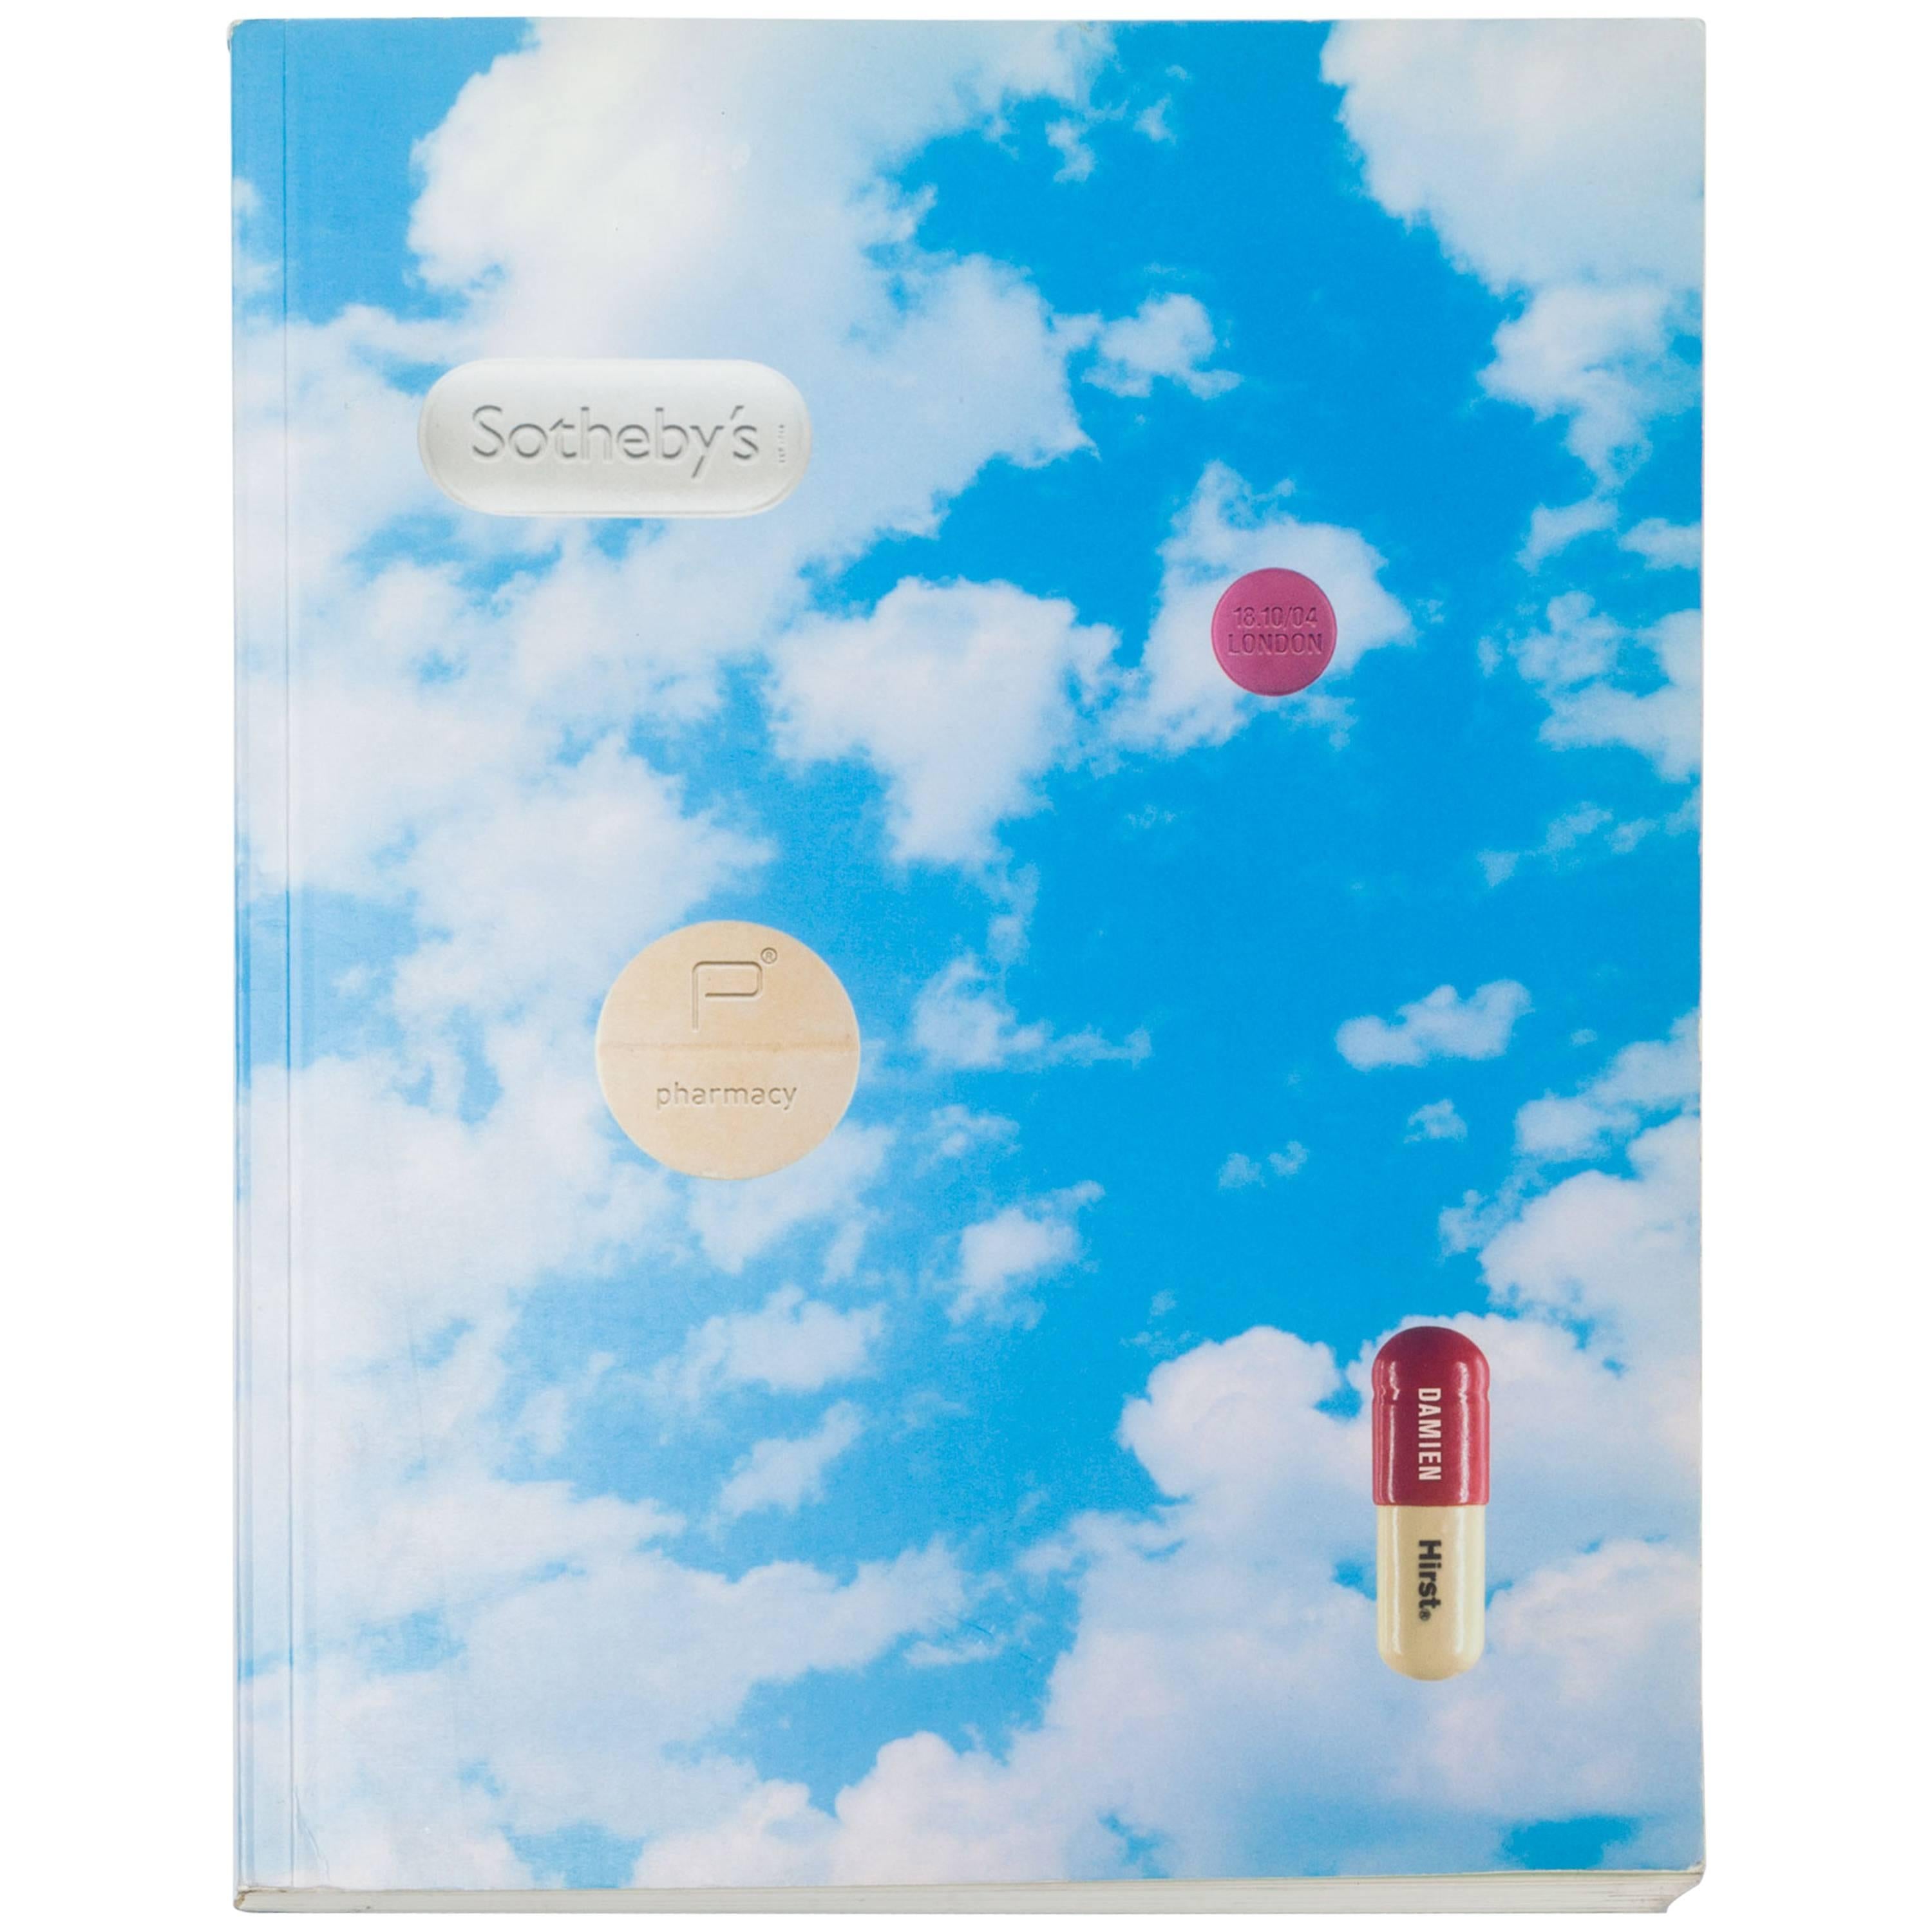 Damien Hirst Pharmacy Catalog with Two Sticker Sheets, Sotheby's, 2004